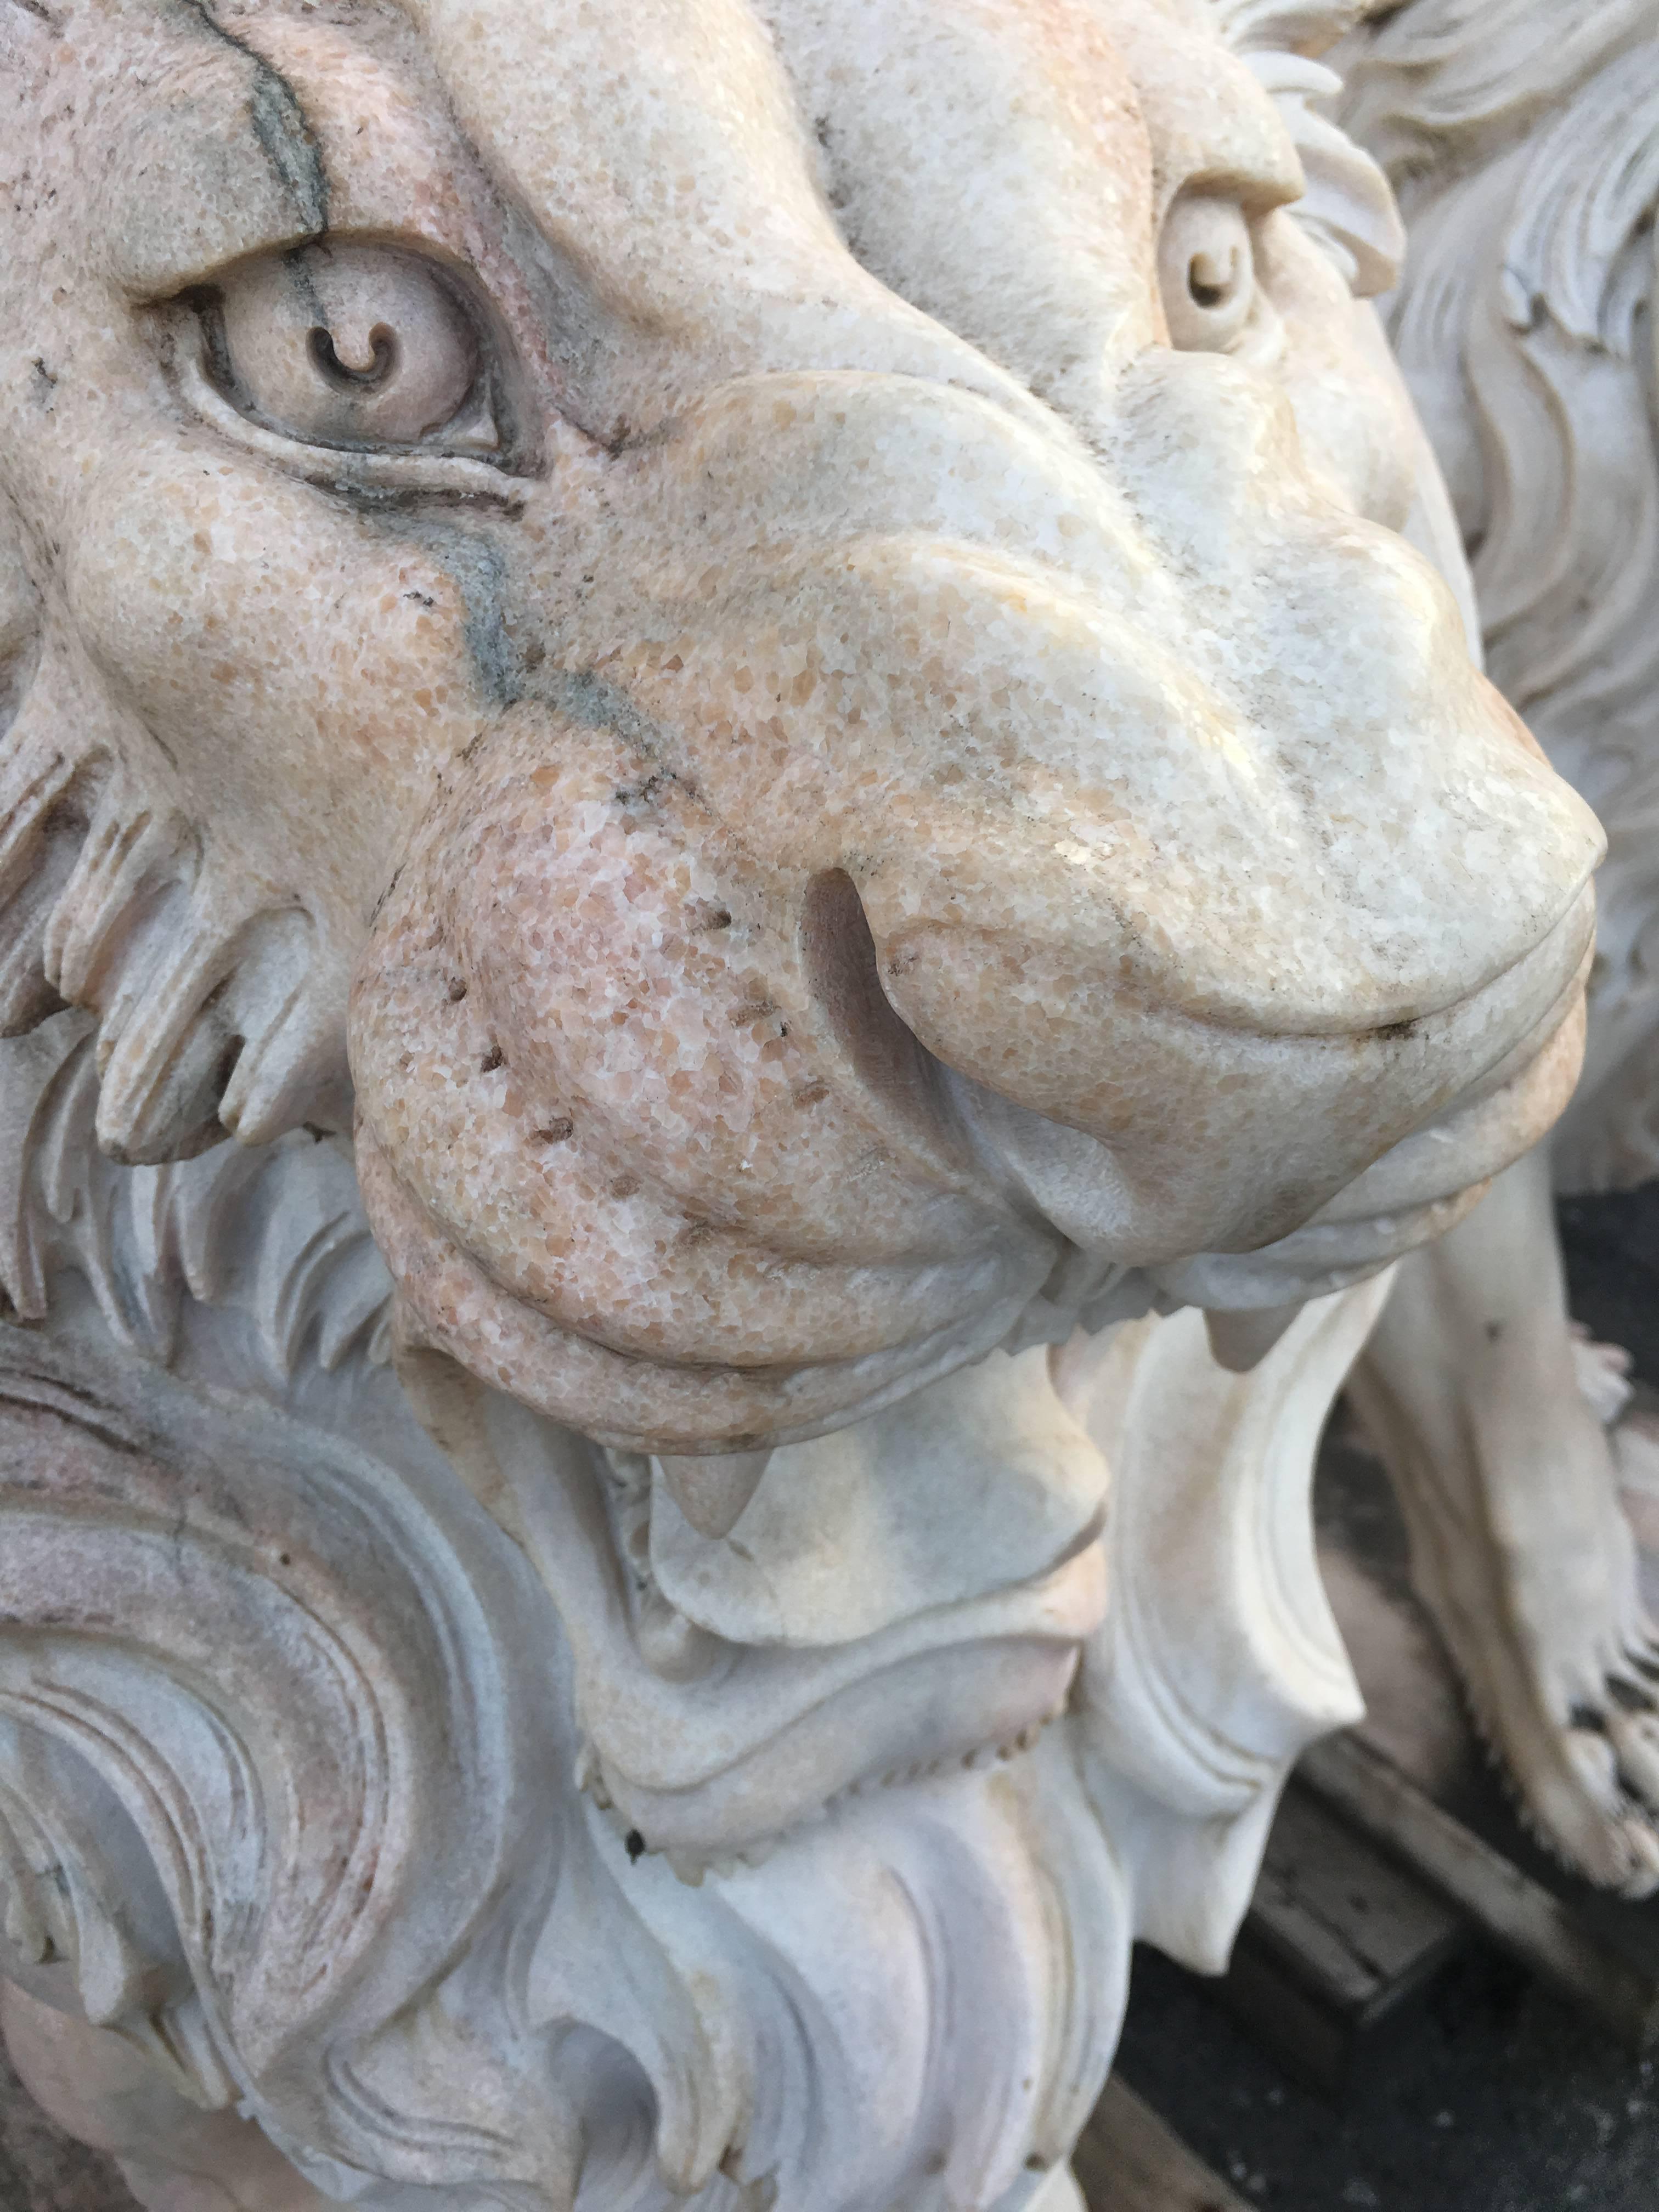 Early 20th century large white solid marble lion, Italy

Impressive carved marble lion garden statue on pedestal

The color is a soft cream with different variations. Beautifully carved!